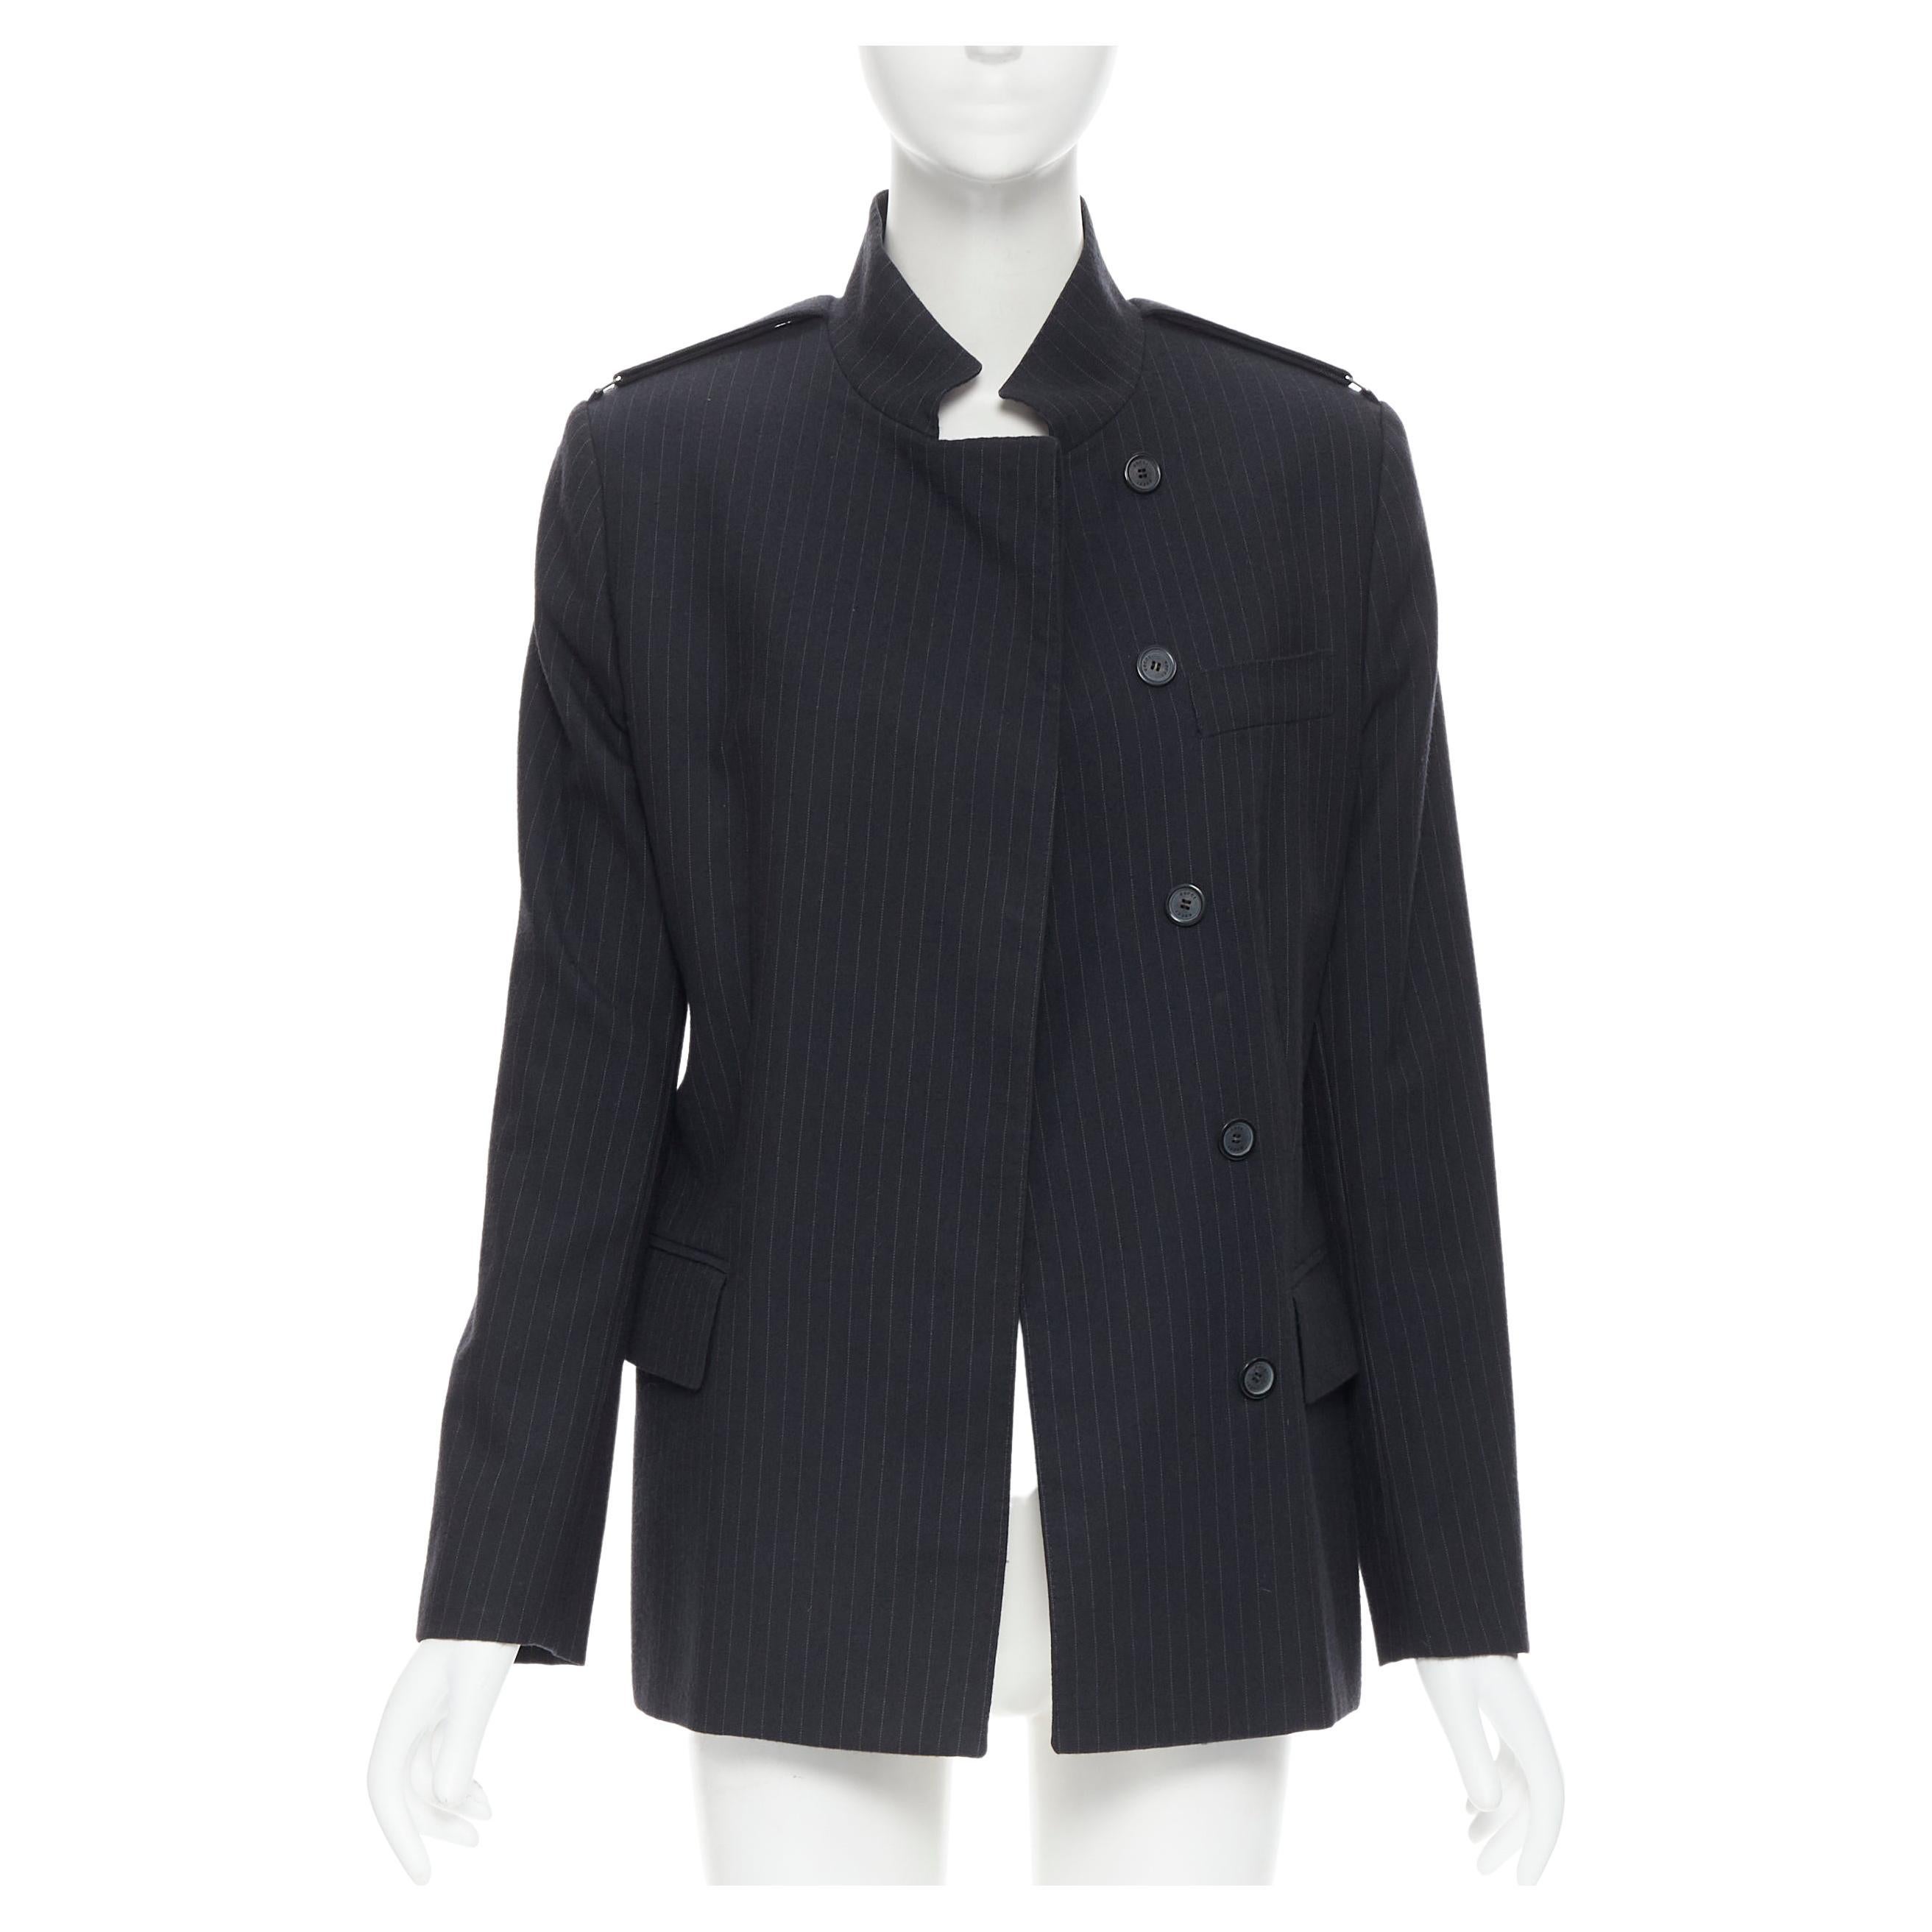 Tom Ford for Gucci Crocodile Textured Black Suit at 1stDibs | tom ford ...